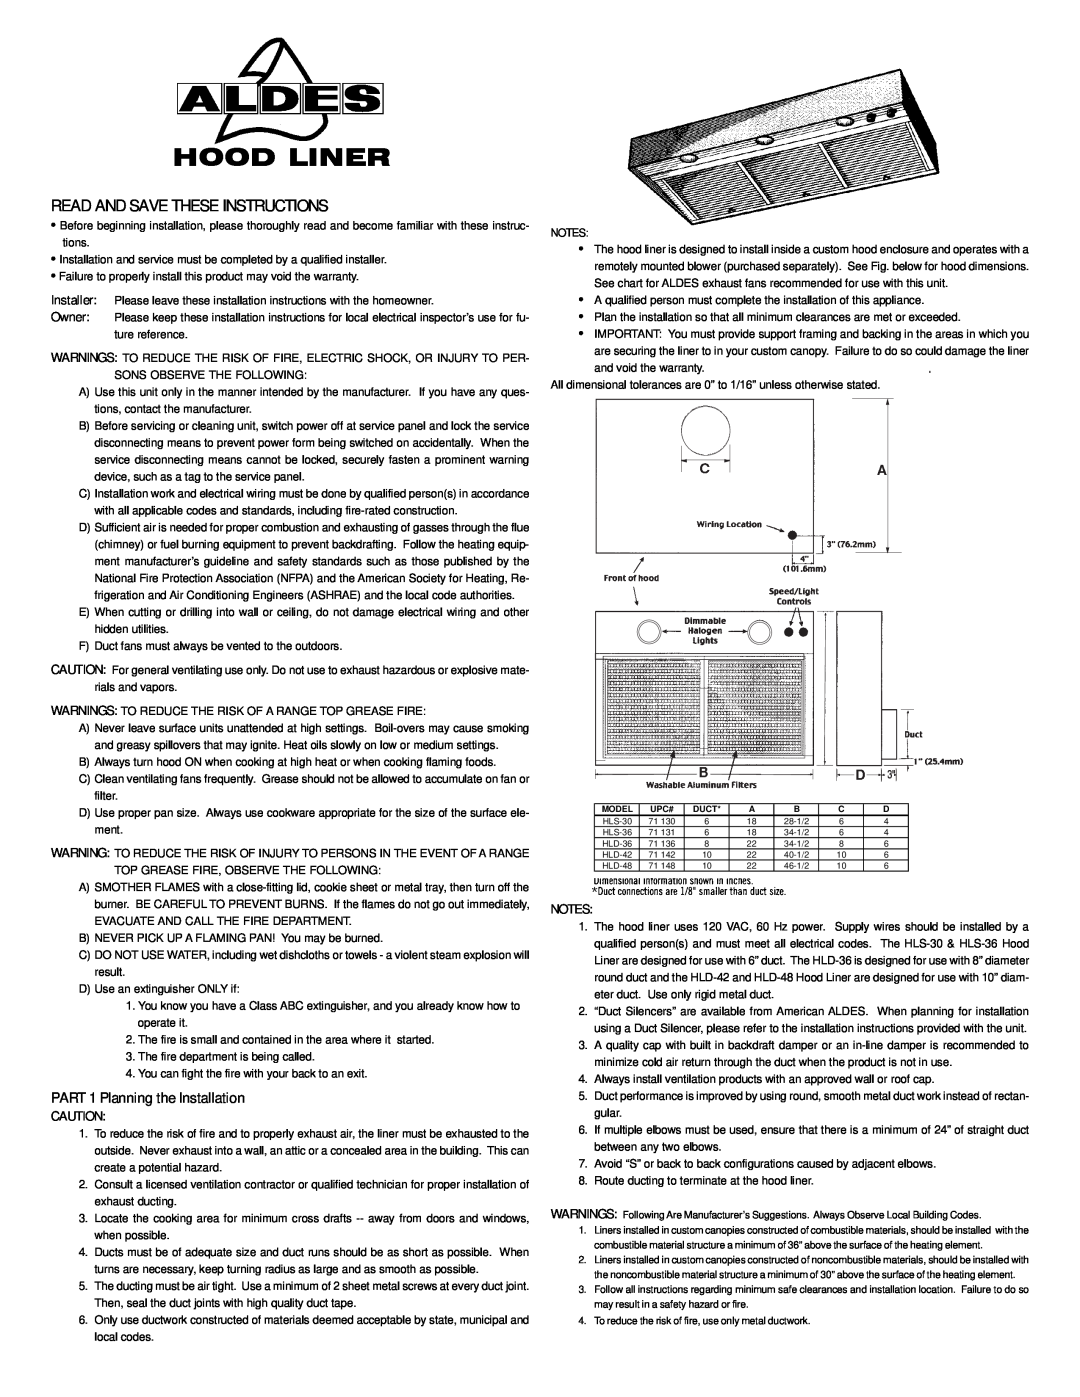 American Aldes Hood Liner dimensions PART 1 Planning the Installation, Read And Save These Instructions 